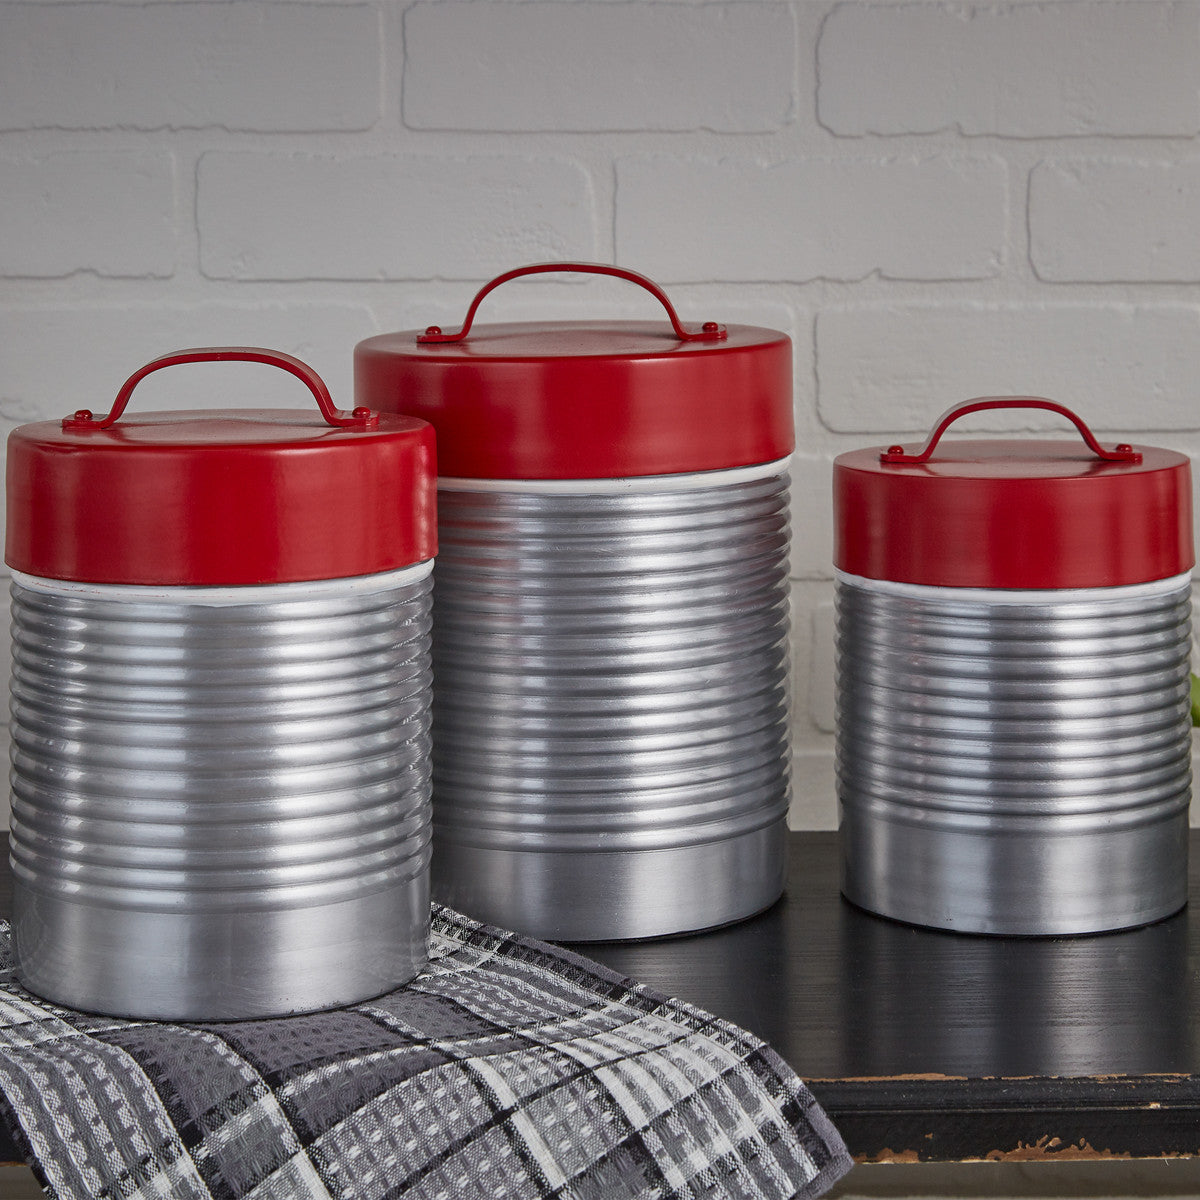 Vintage Thermos Canisters - Set of 3 - Park Designs